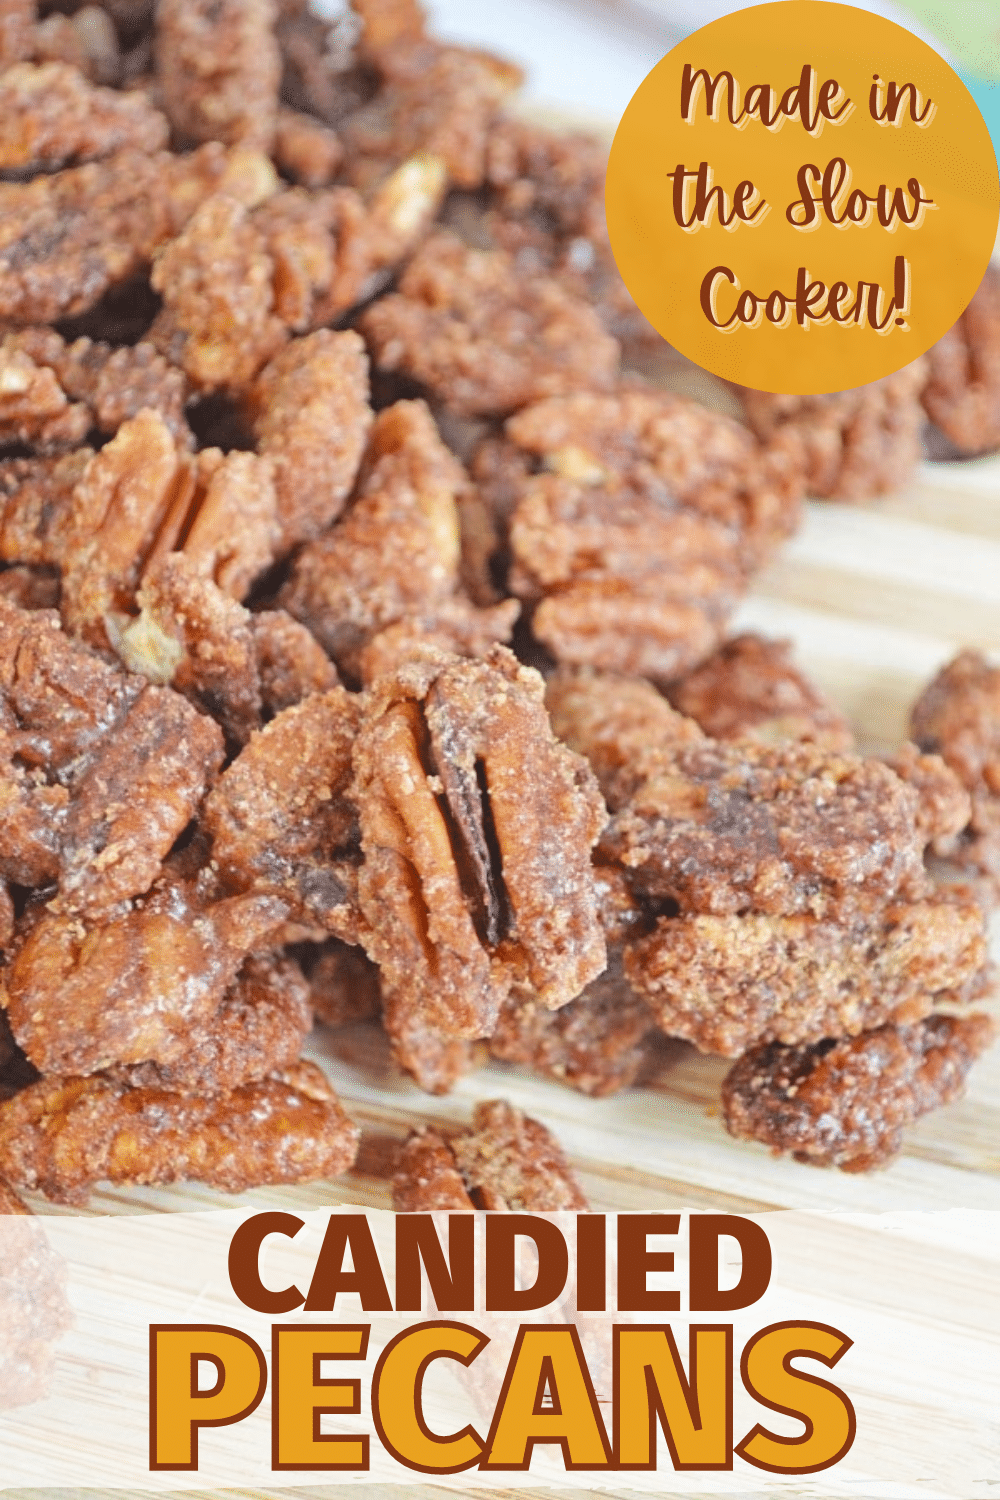 These Slow Cooker Candied Pecans are yummy all on their own, but also make salads so much better. Make them for yourself or to give as gifts. Super easy. So delicious! #candiedpecans #sweettreats #DIYgiftidea via @wondermomwannab